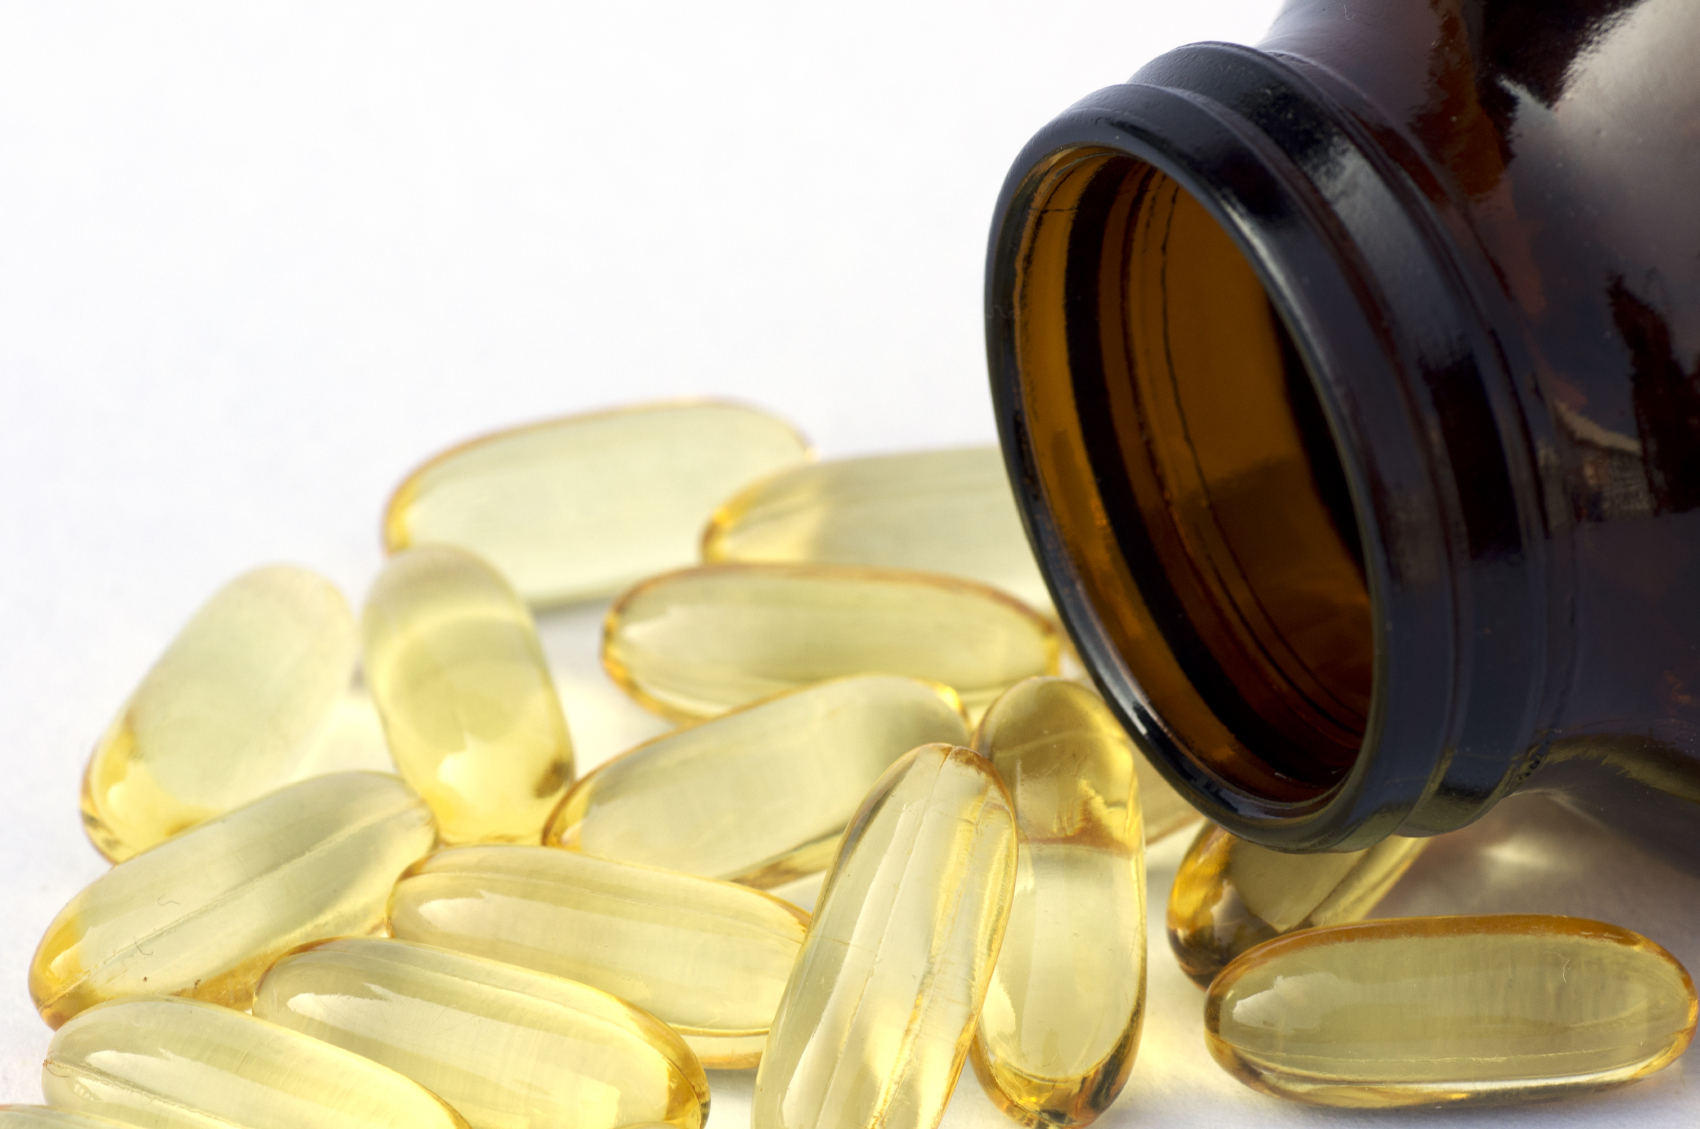 Don’t rely on fatty acid supplements for protection against heart disease